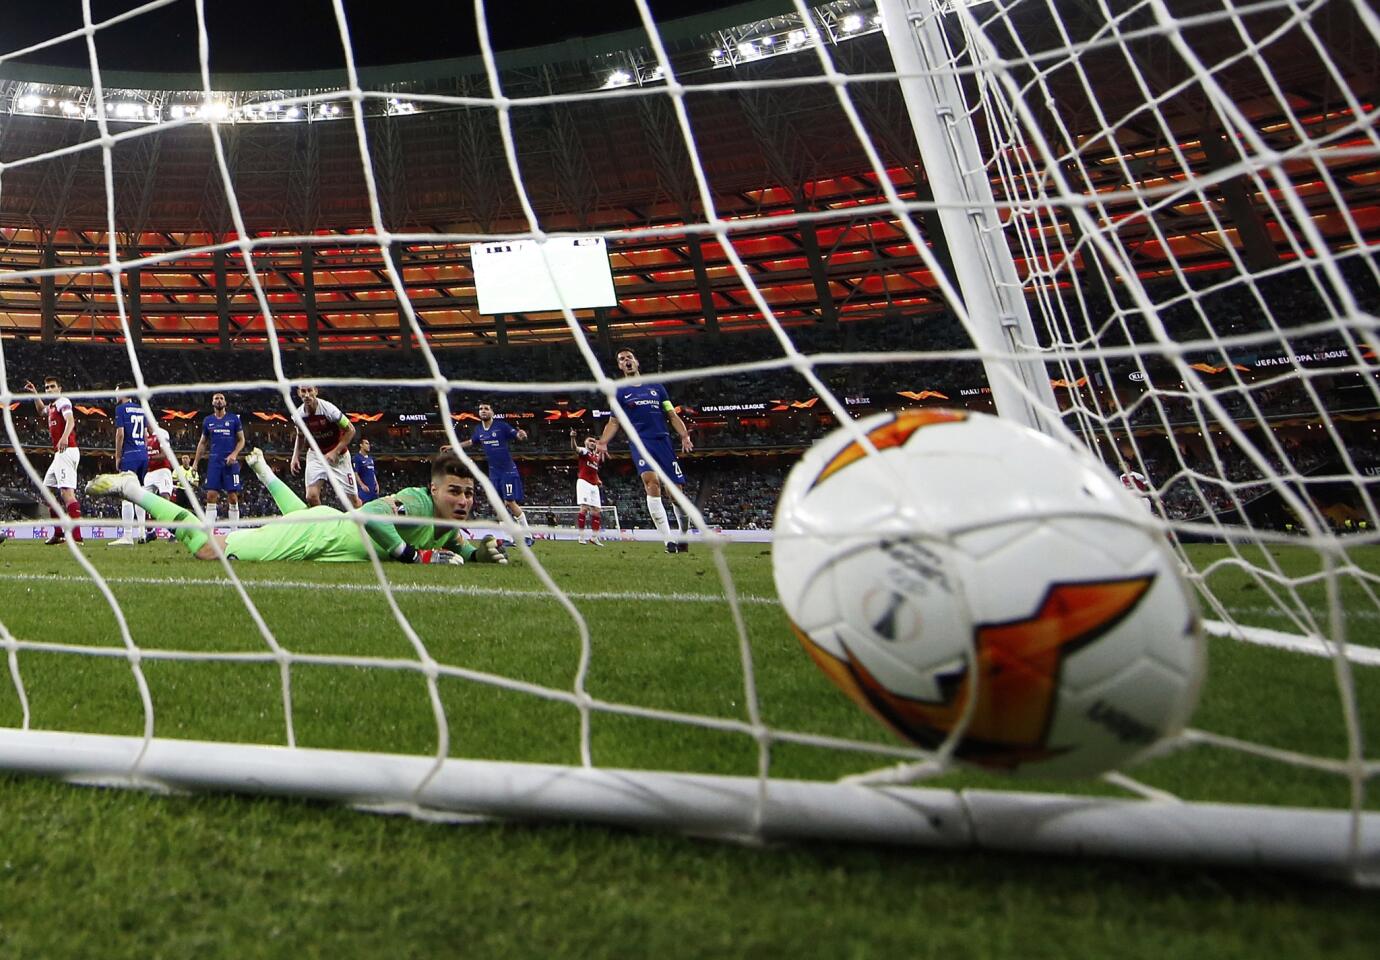 Chelsea goalkeeper Kepa Arrizabalaga, on the ground, looks at the ball after a goal from Arsenal's Alex Iwobi during the Europa League Final soccer match between Chelsea and Arsenal at the Olympic Stadium in Baku, Azerbaijan, Thursday, May 30, 2019. (AP Photo/Darko Bandic)